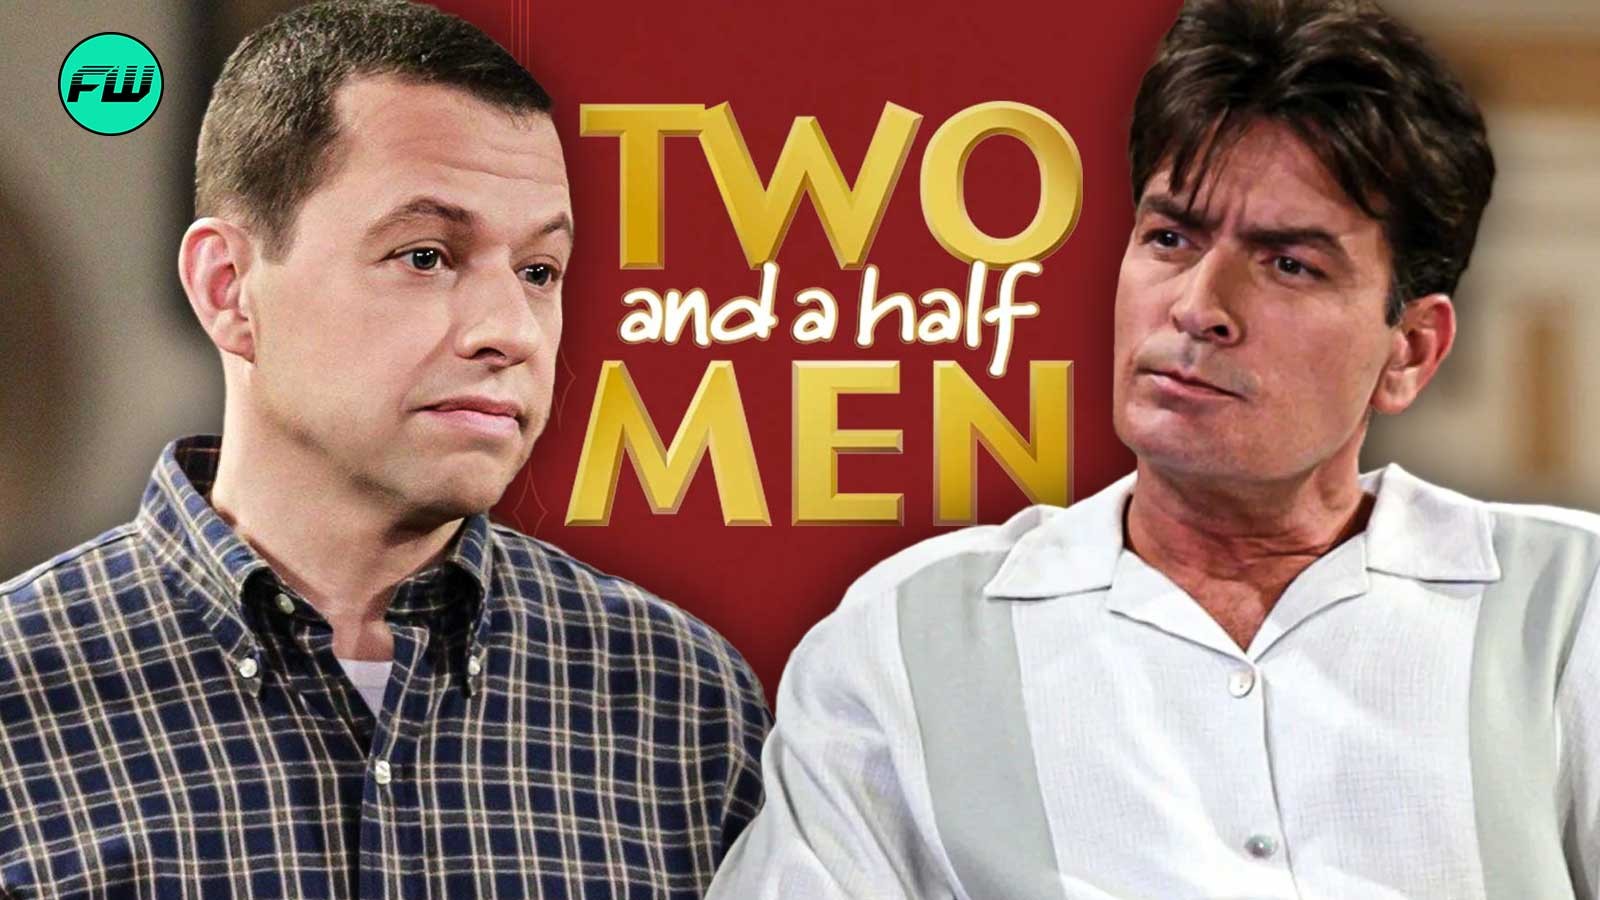 two and a half men, jon cryer, charlie sheen